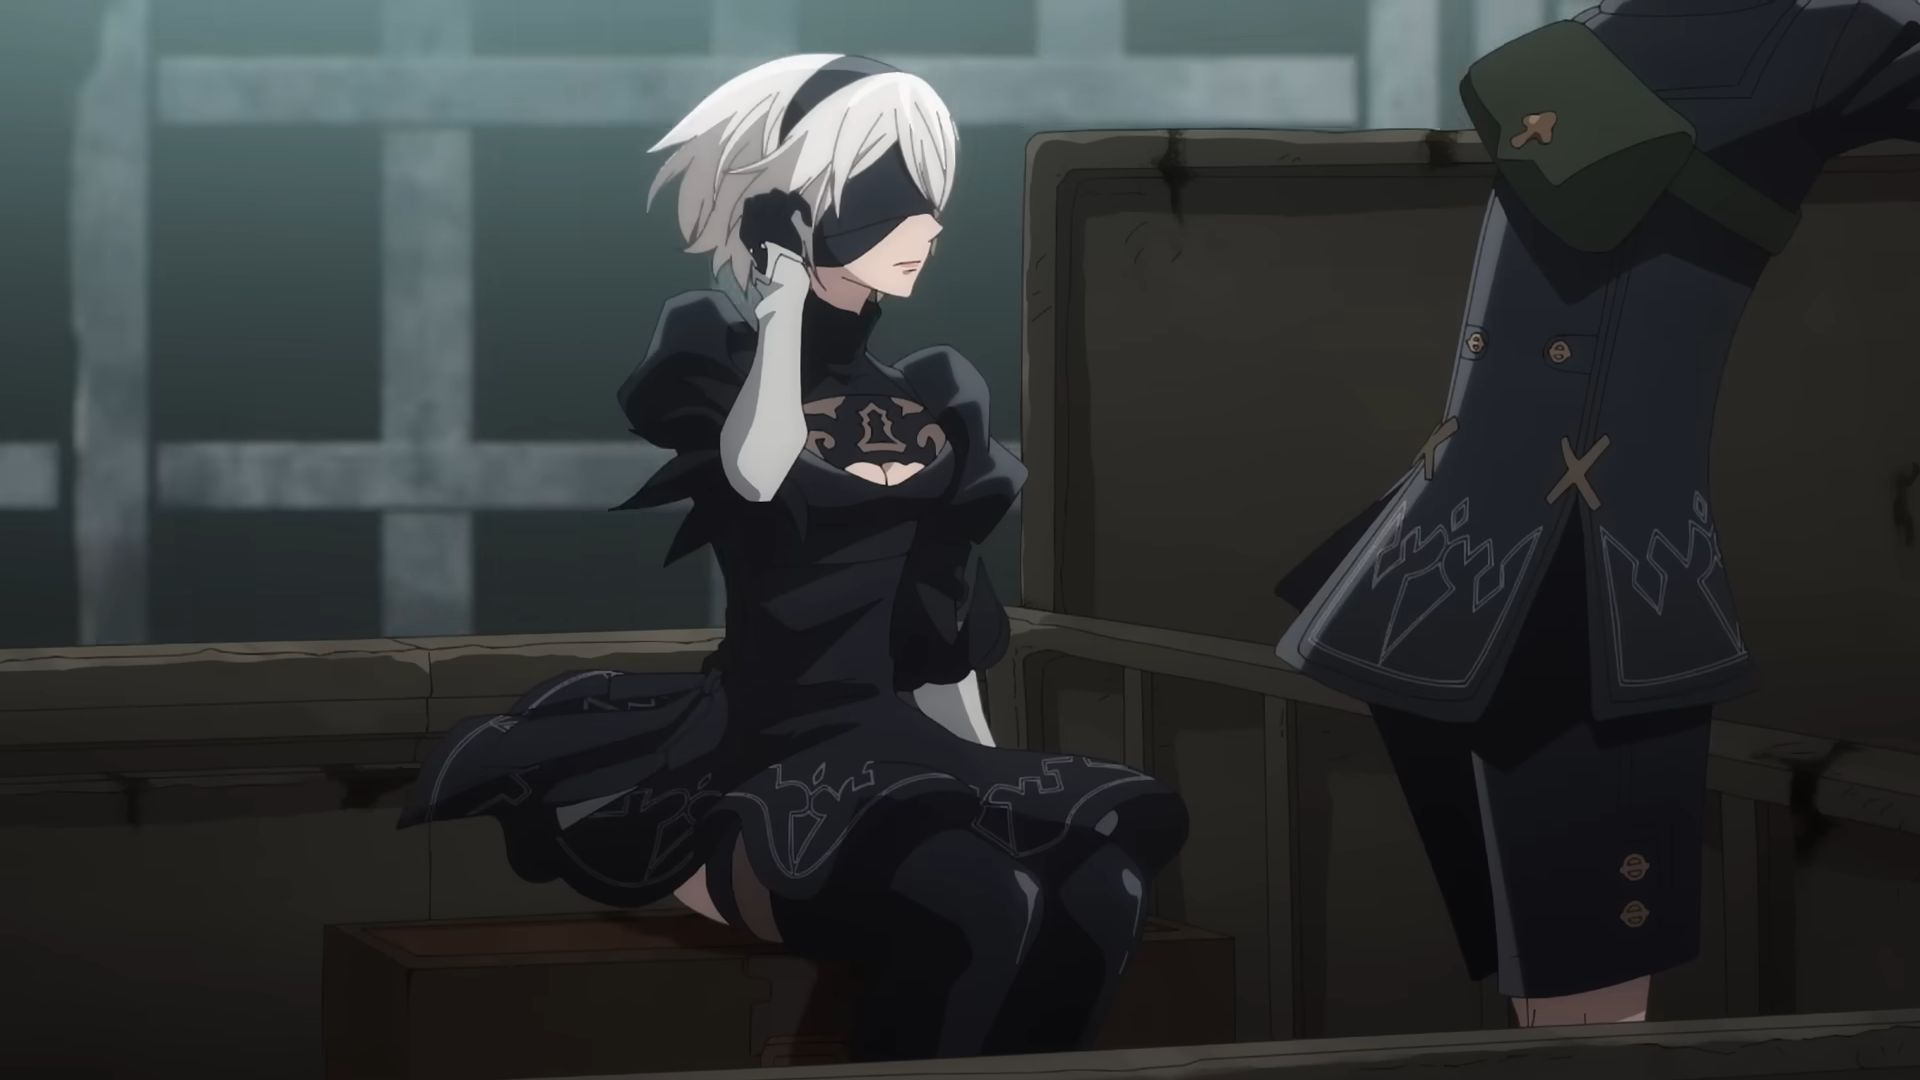 NieR Automata Ver11a episode 1 Release date where to watch what to  expect and more